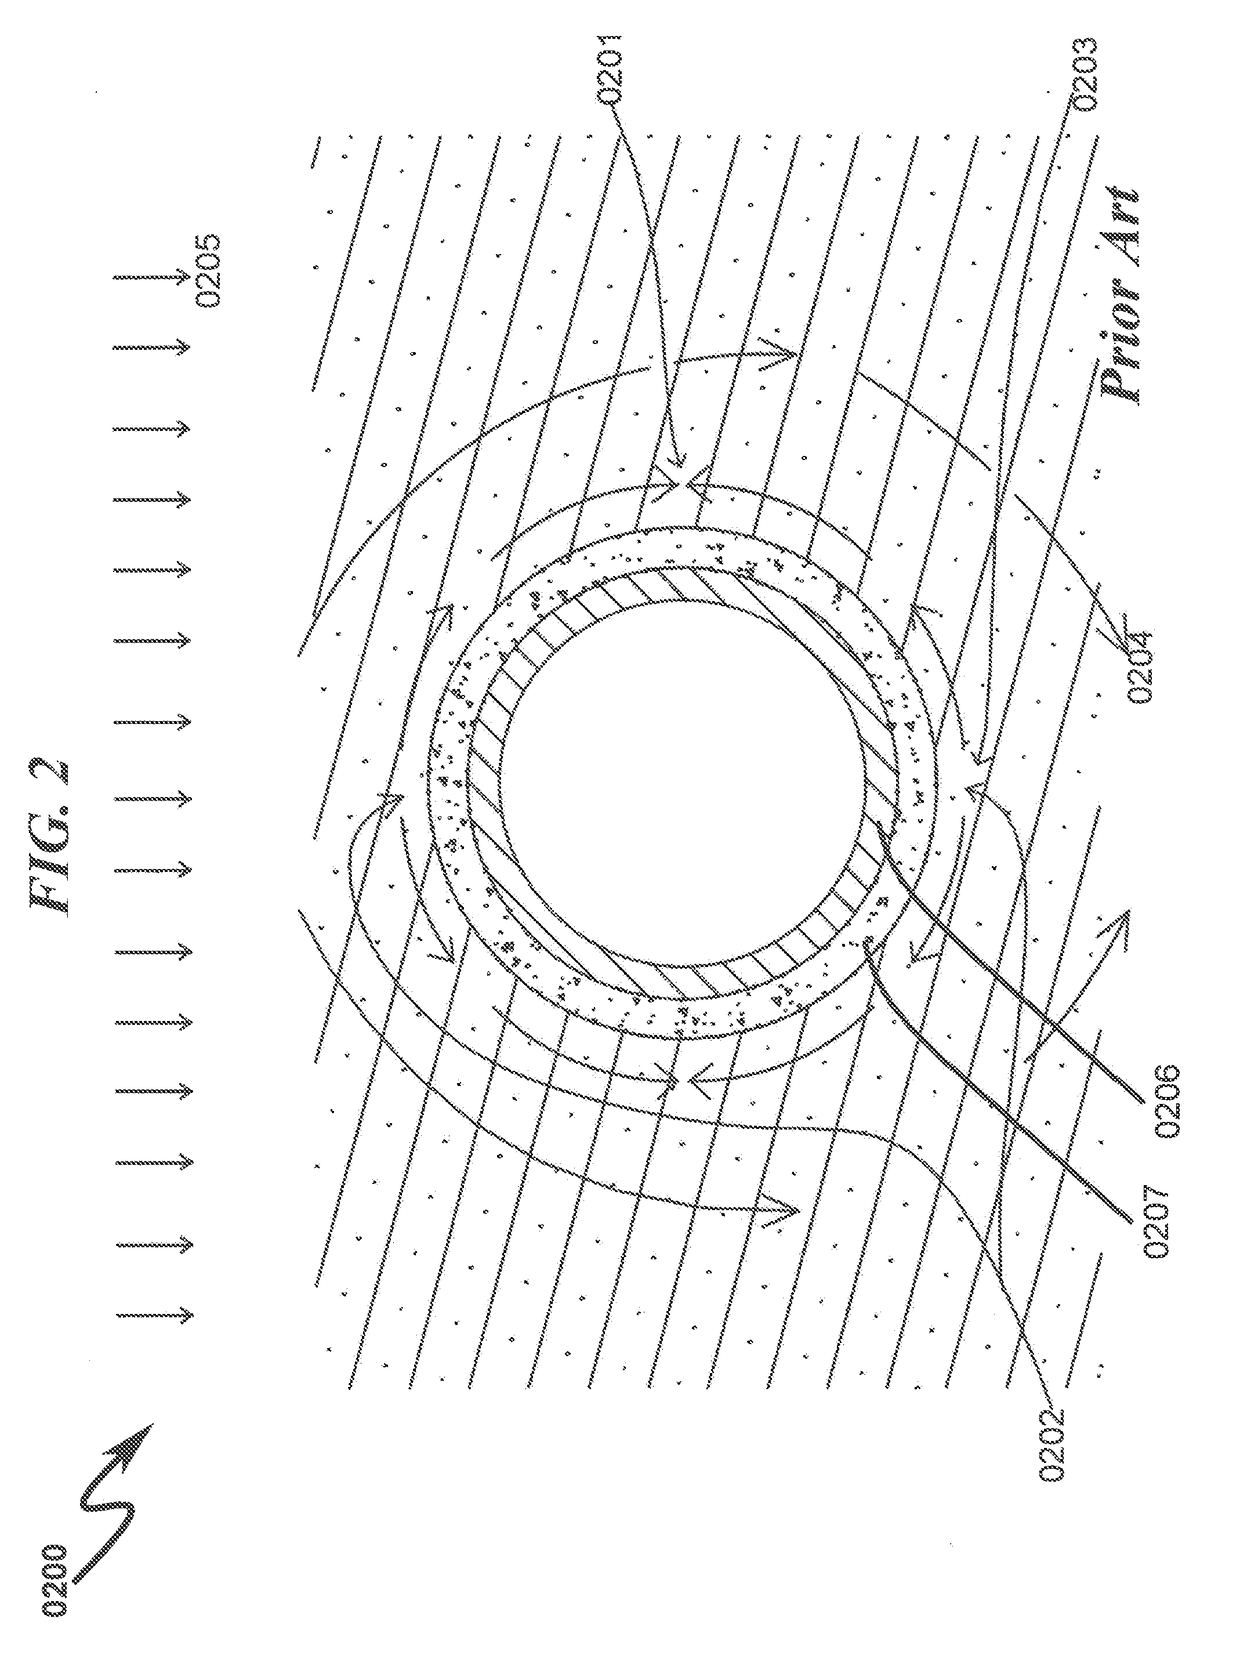 Optimal phasing of charges in a perforating system and method